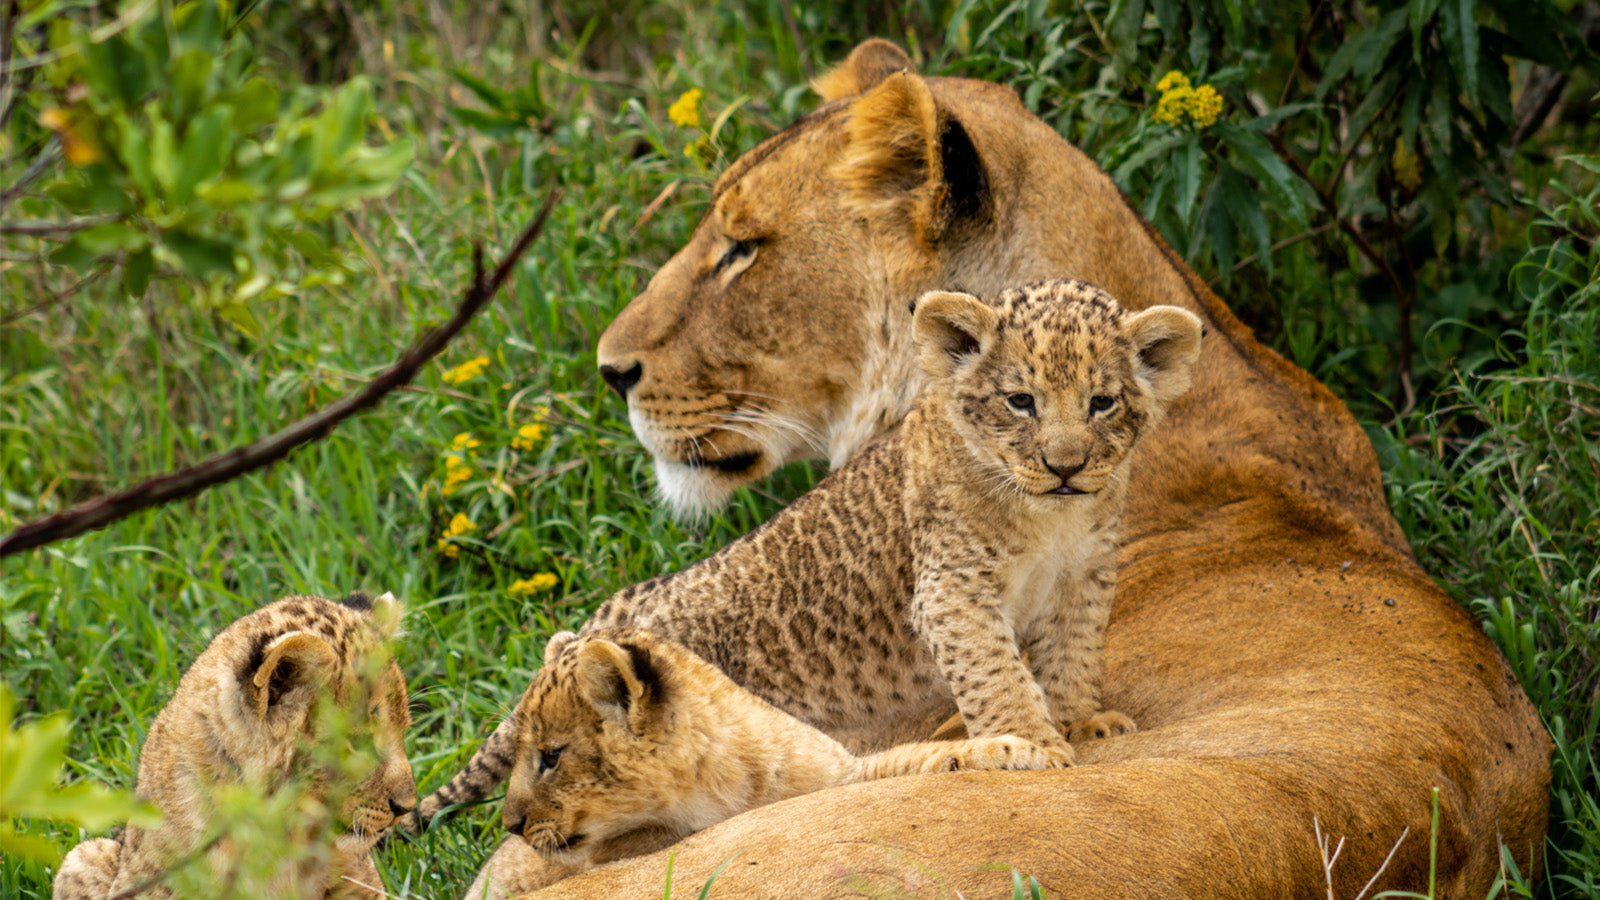 Lioness and three lion cubs are relaxing in the grass in the Ol Pejeta Conservancy in Kenya.